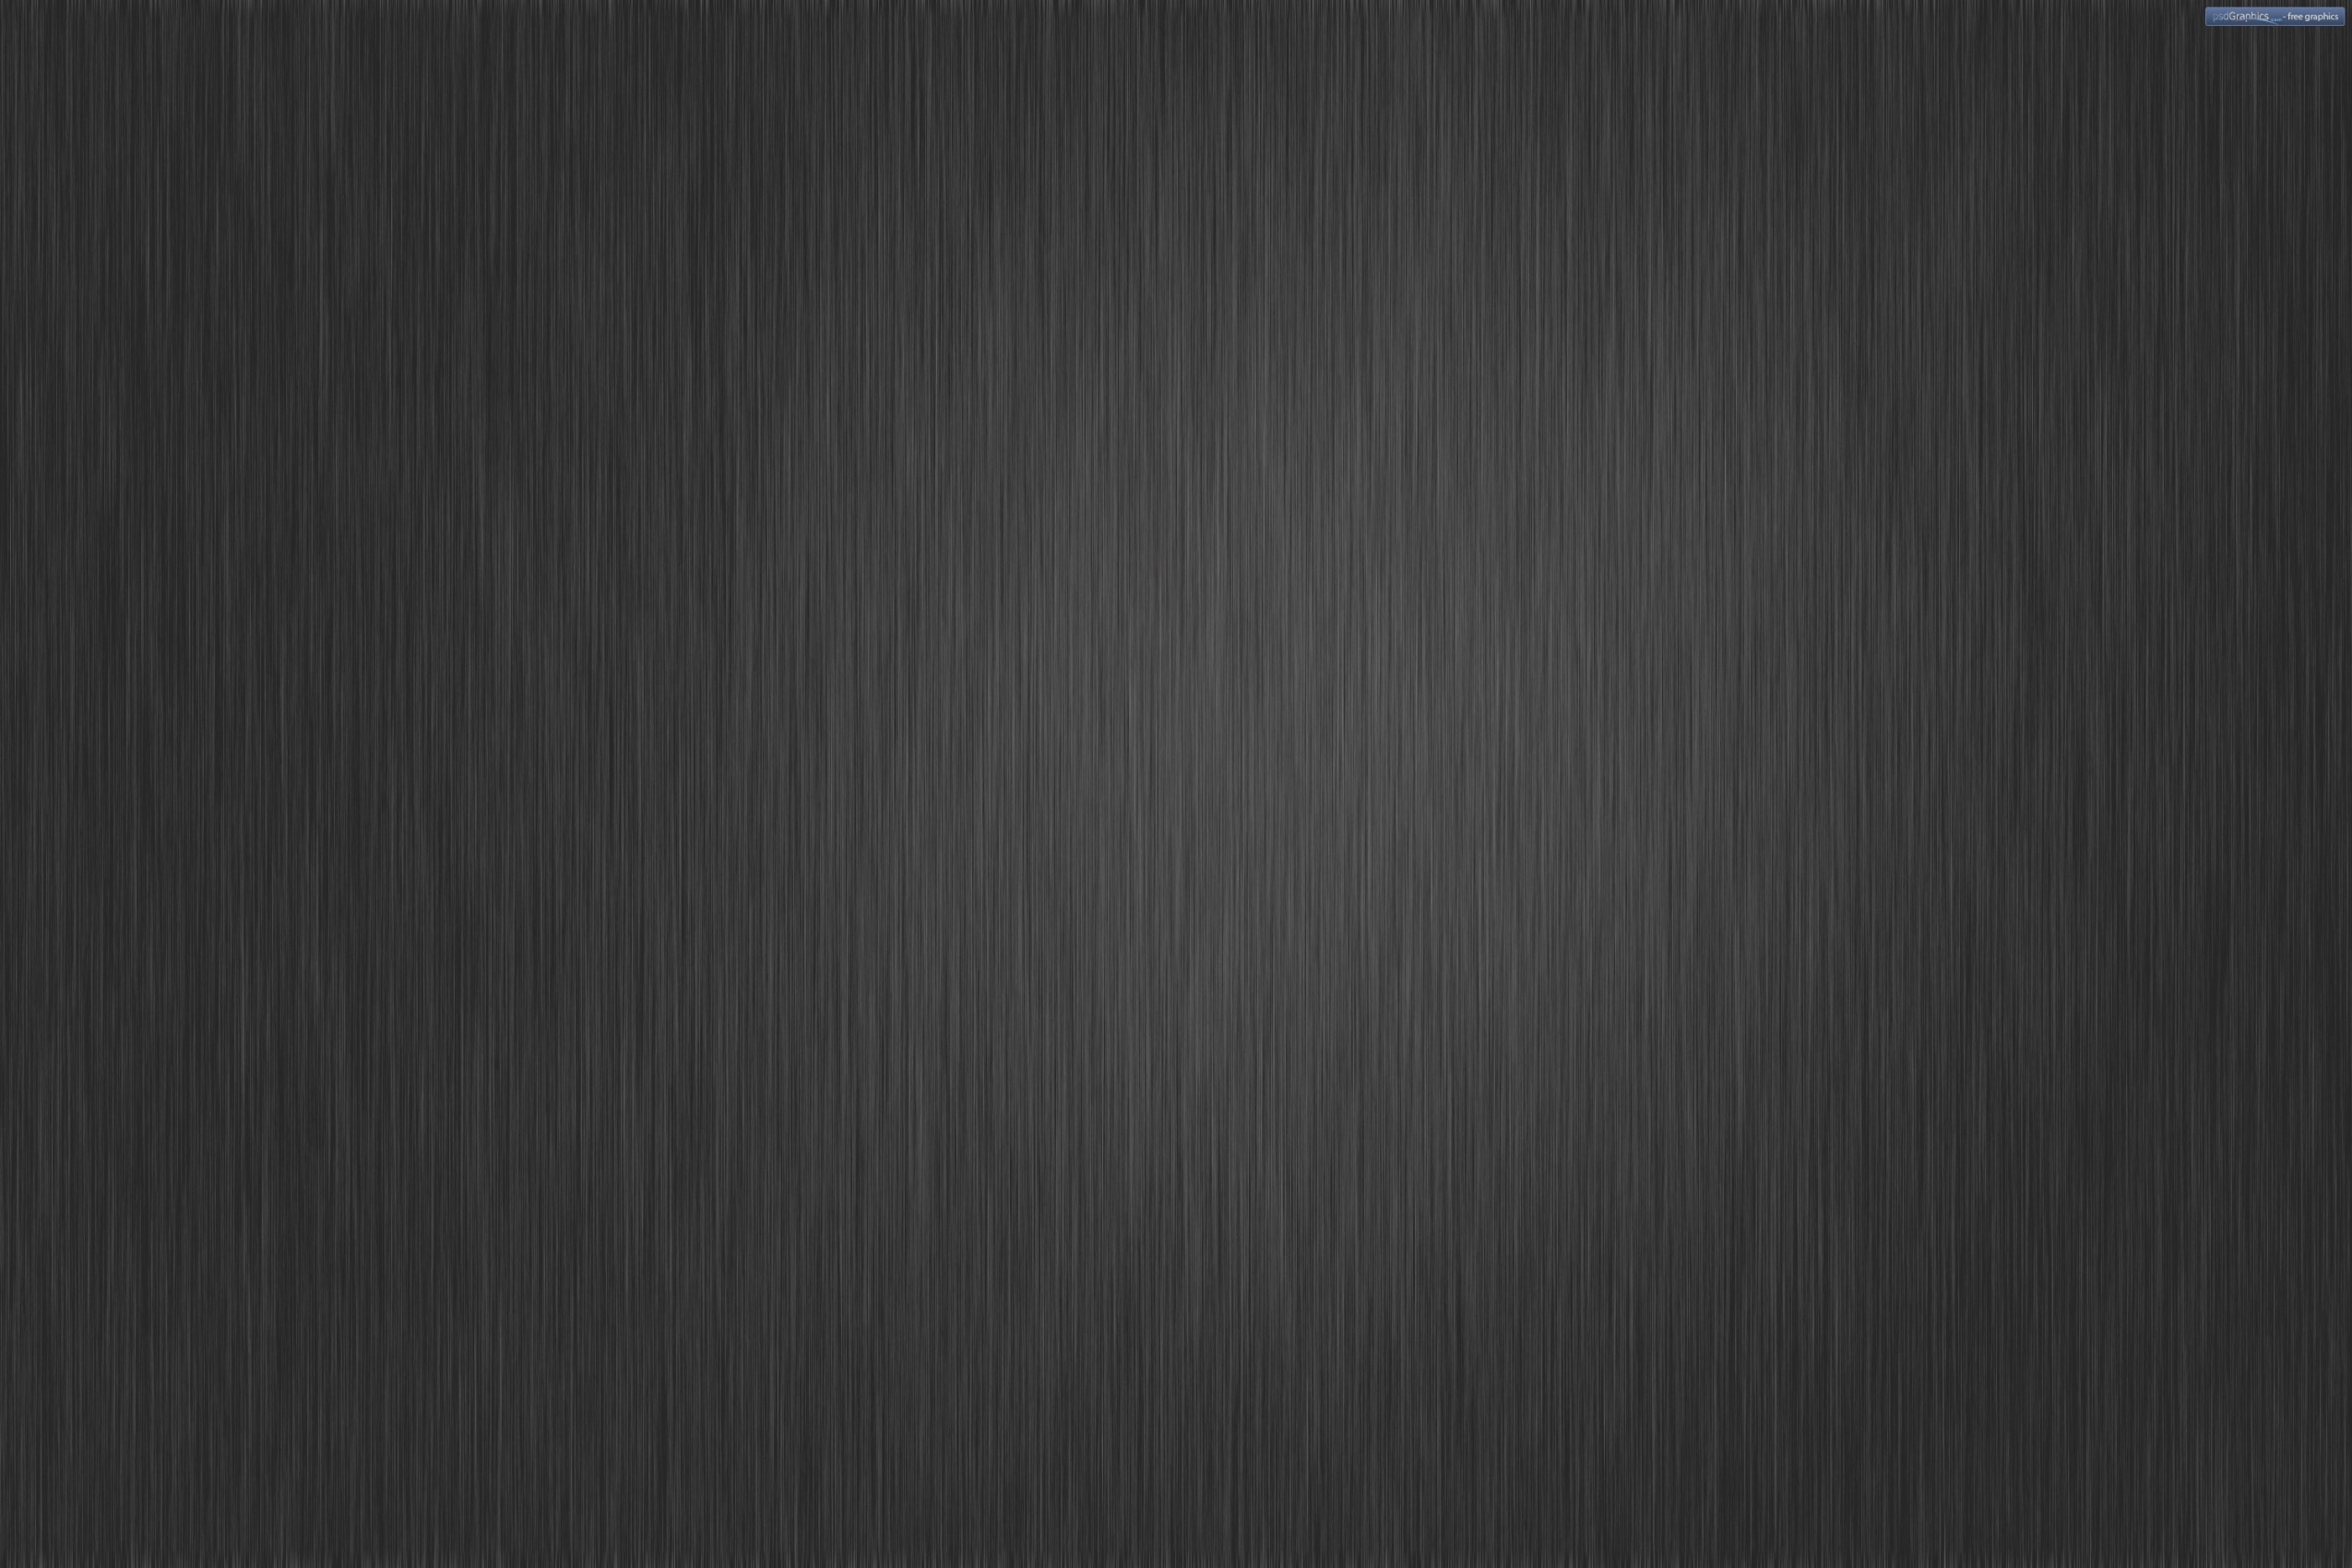 2550x1700 ... plain black and white tumblr backgrounds | Wallpapers HD (High  Difinition) ...